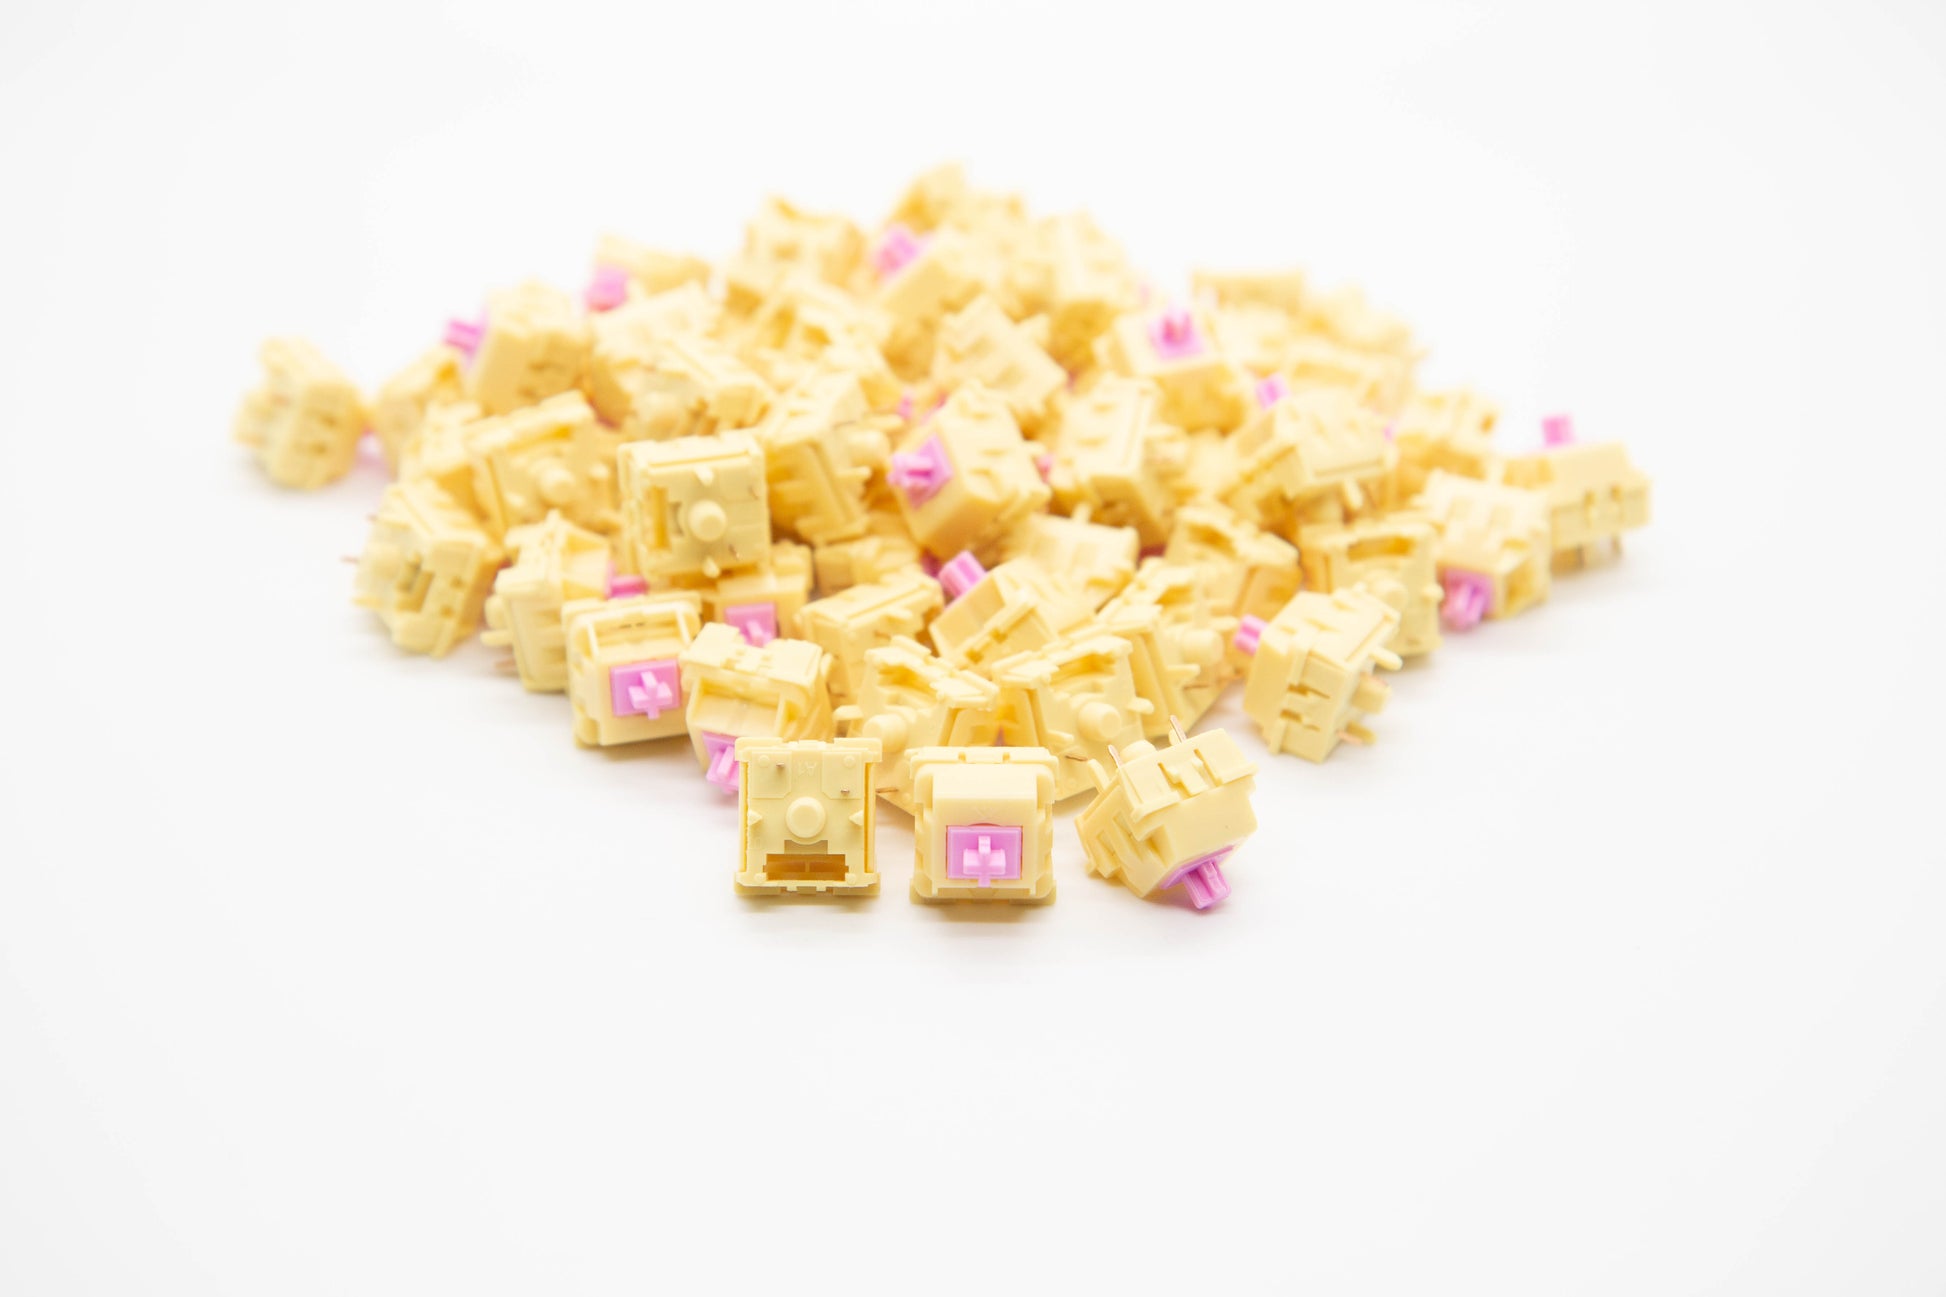 Close-up shot of a pile of KTT Mallo mechanical keyboard switches featuring yellow housing and pink stems